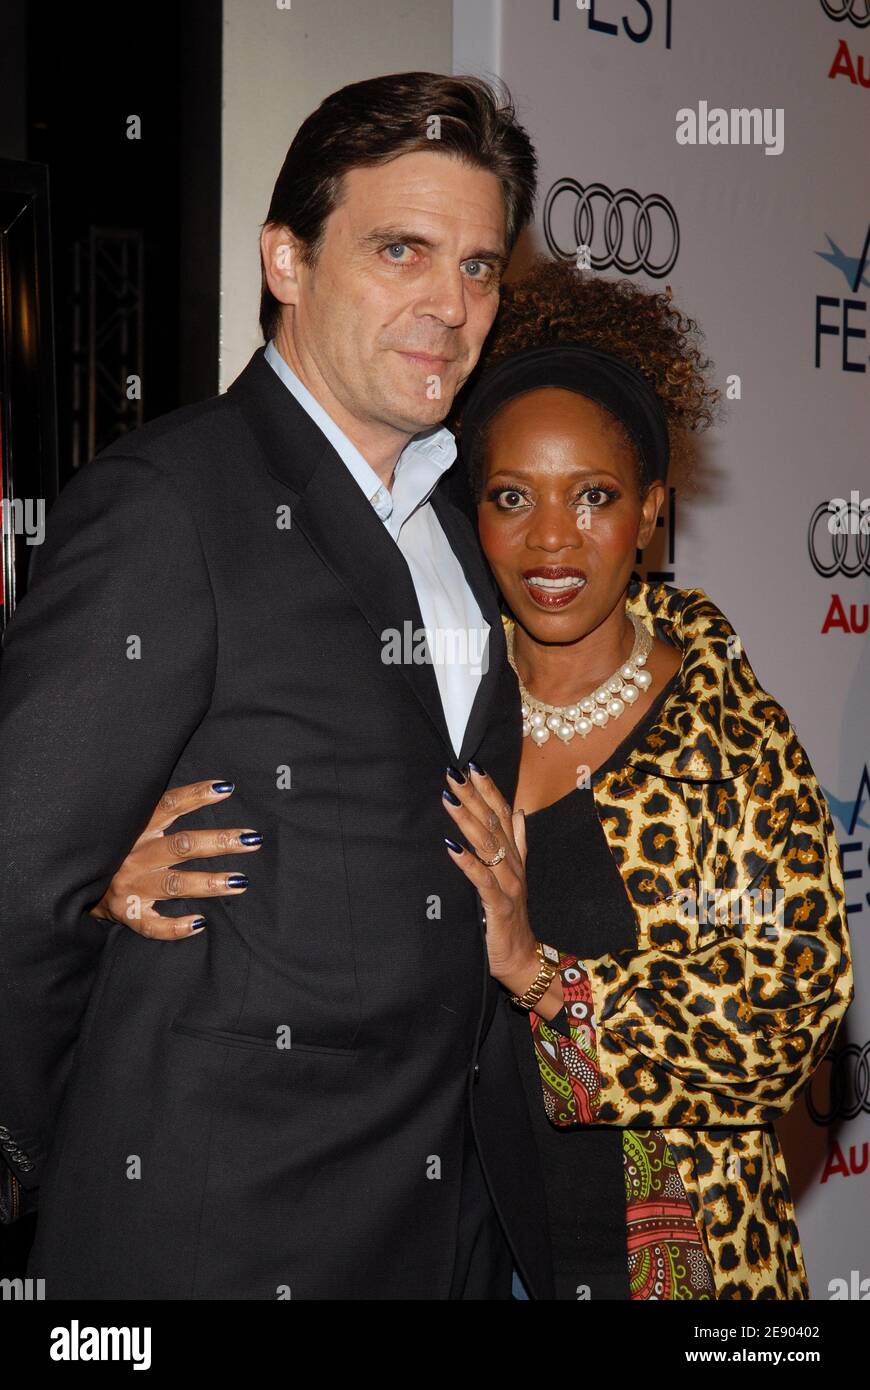 https://c8.alamy.com/comp/2E90402/roderick-spencer-and-alfre-woodard-attend-the-screening-of-love-in-the-time-of-cholera-part-of-the-afi-fest-2007-and-held-at-the-arclight-cinemas-in-los-angeles-ca-usa-on-november-11-2007-photo-by-lionel-hahnabacapresscom-2E90402.jpg